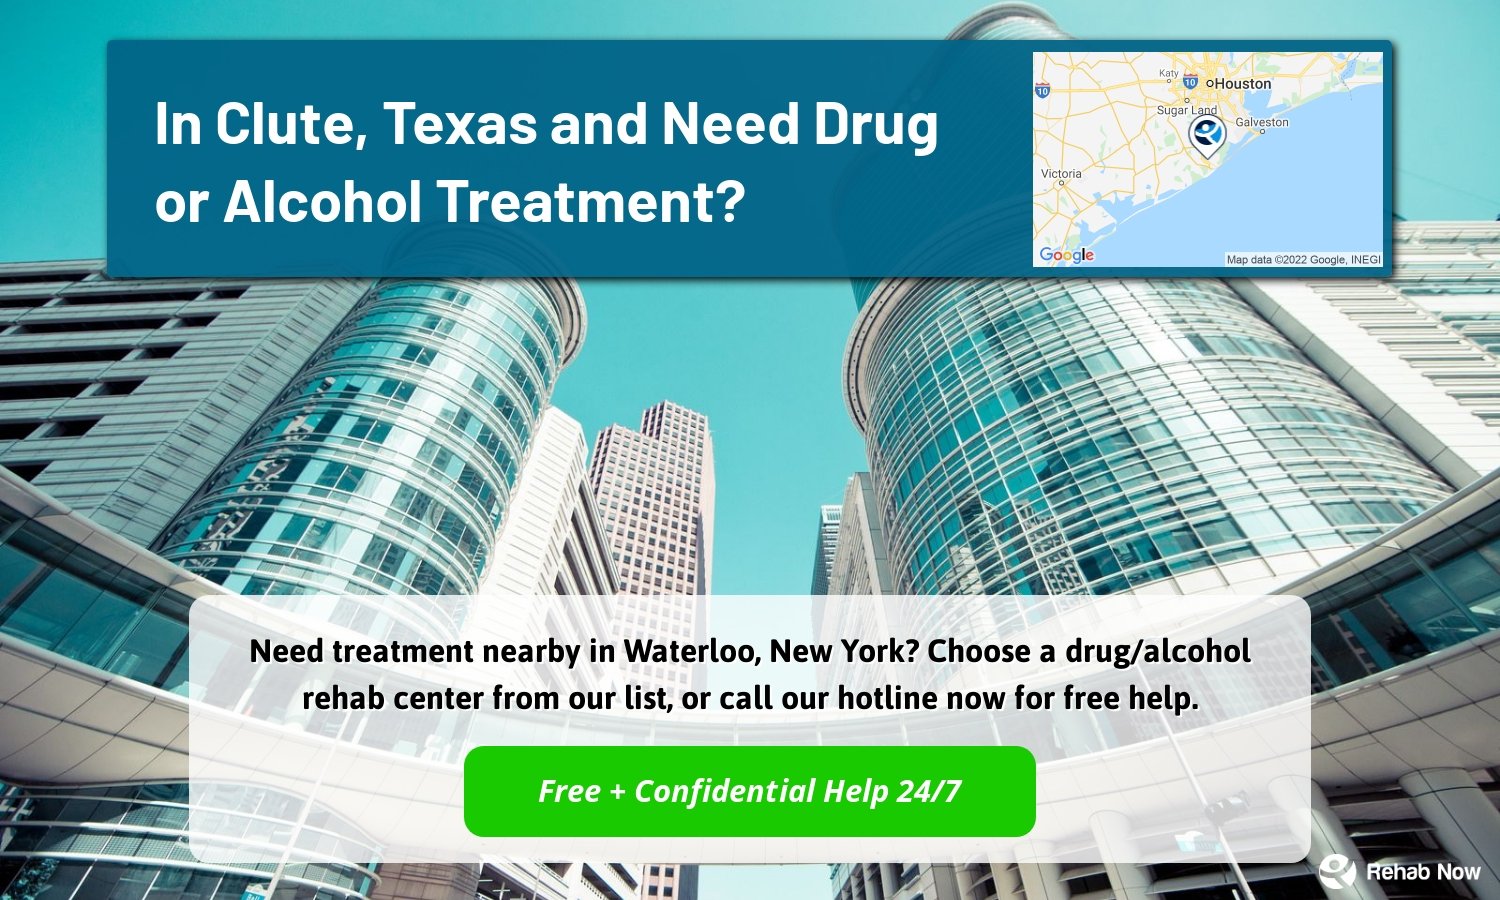 Need treatment nearby in Waterloo, New York? Choose a drug/alcohol rehab center from our list, or call our hotline now for free help.